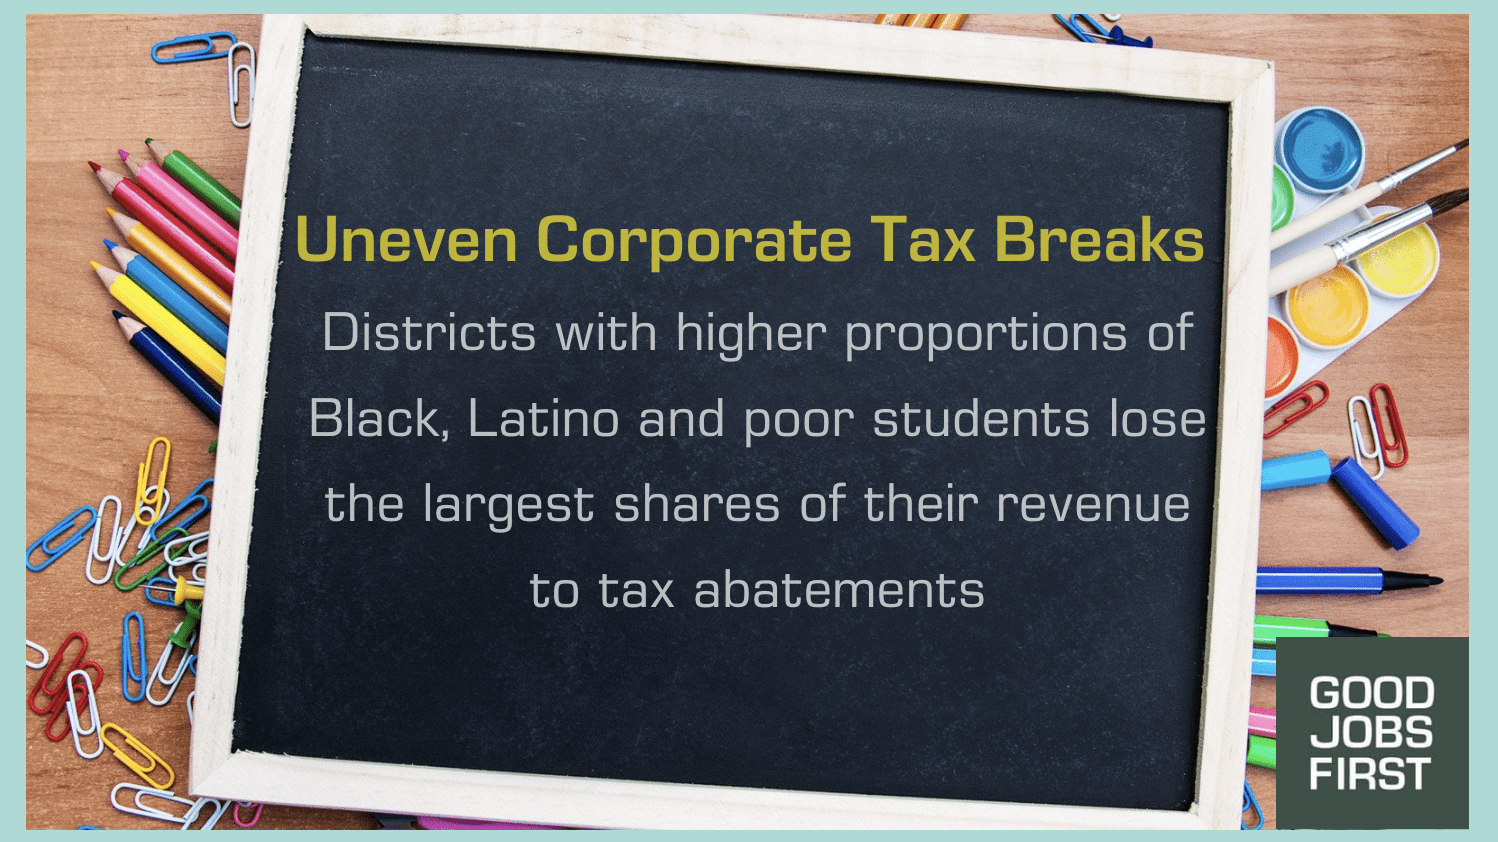 Chalkboard surrounded by school supplies like pencils, paper clips and paints and text on chalkboard says,"Uneven Corporate Tax Breaks Districts with higher proportions of Black, Latino and poor students lose the largest shares of their revenue to tax abatements"